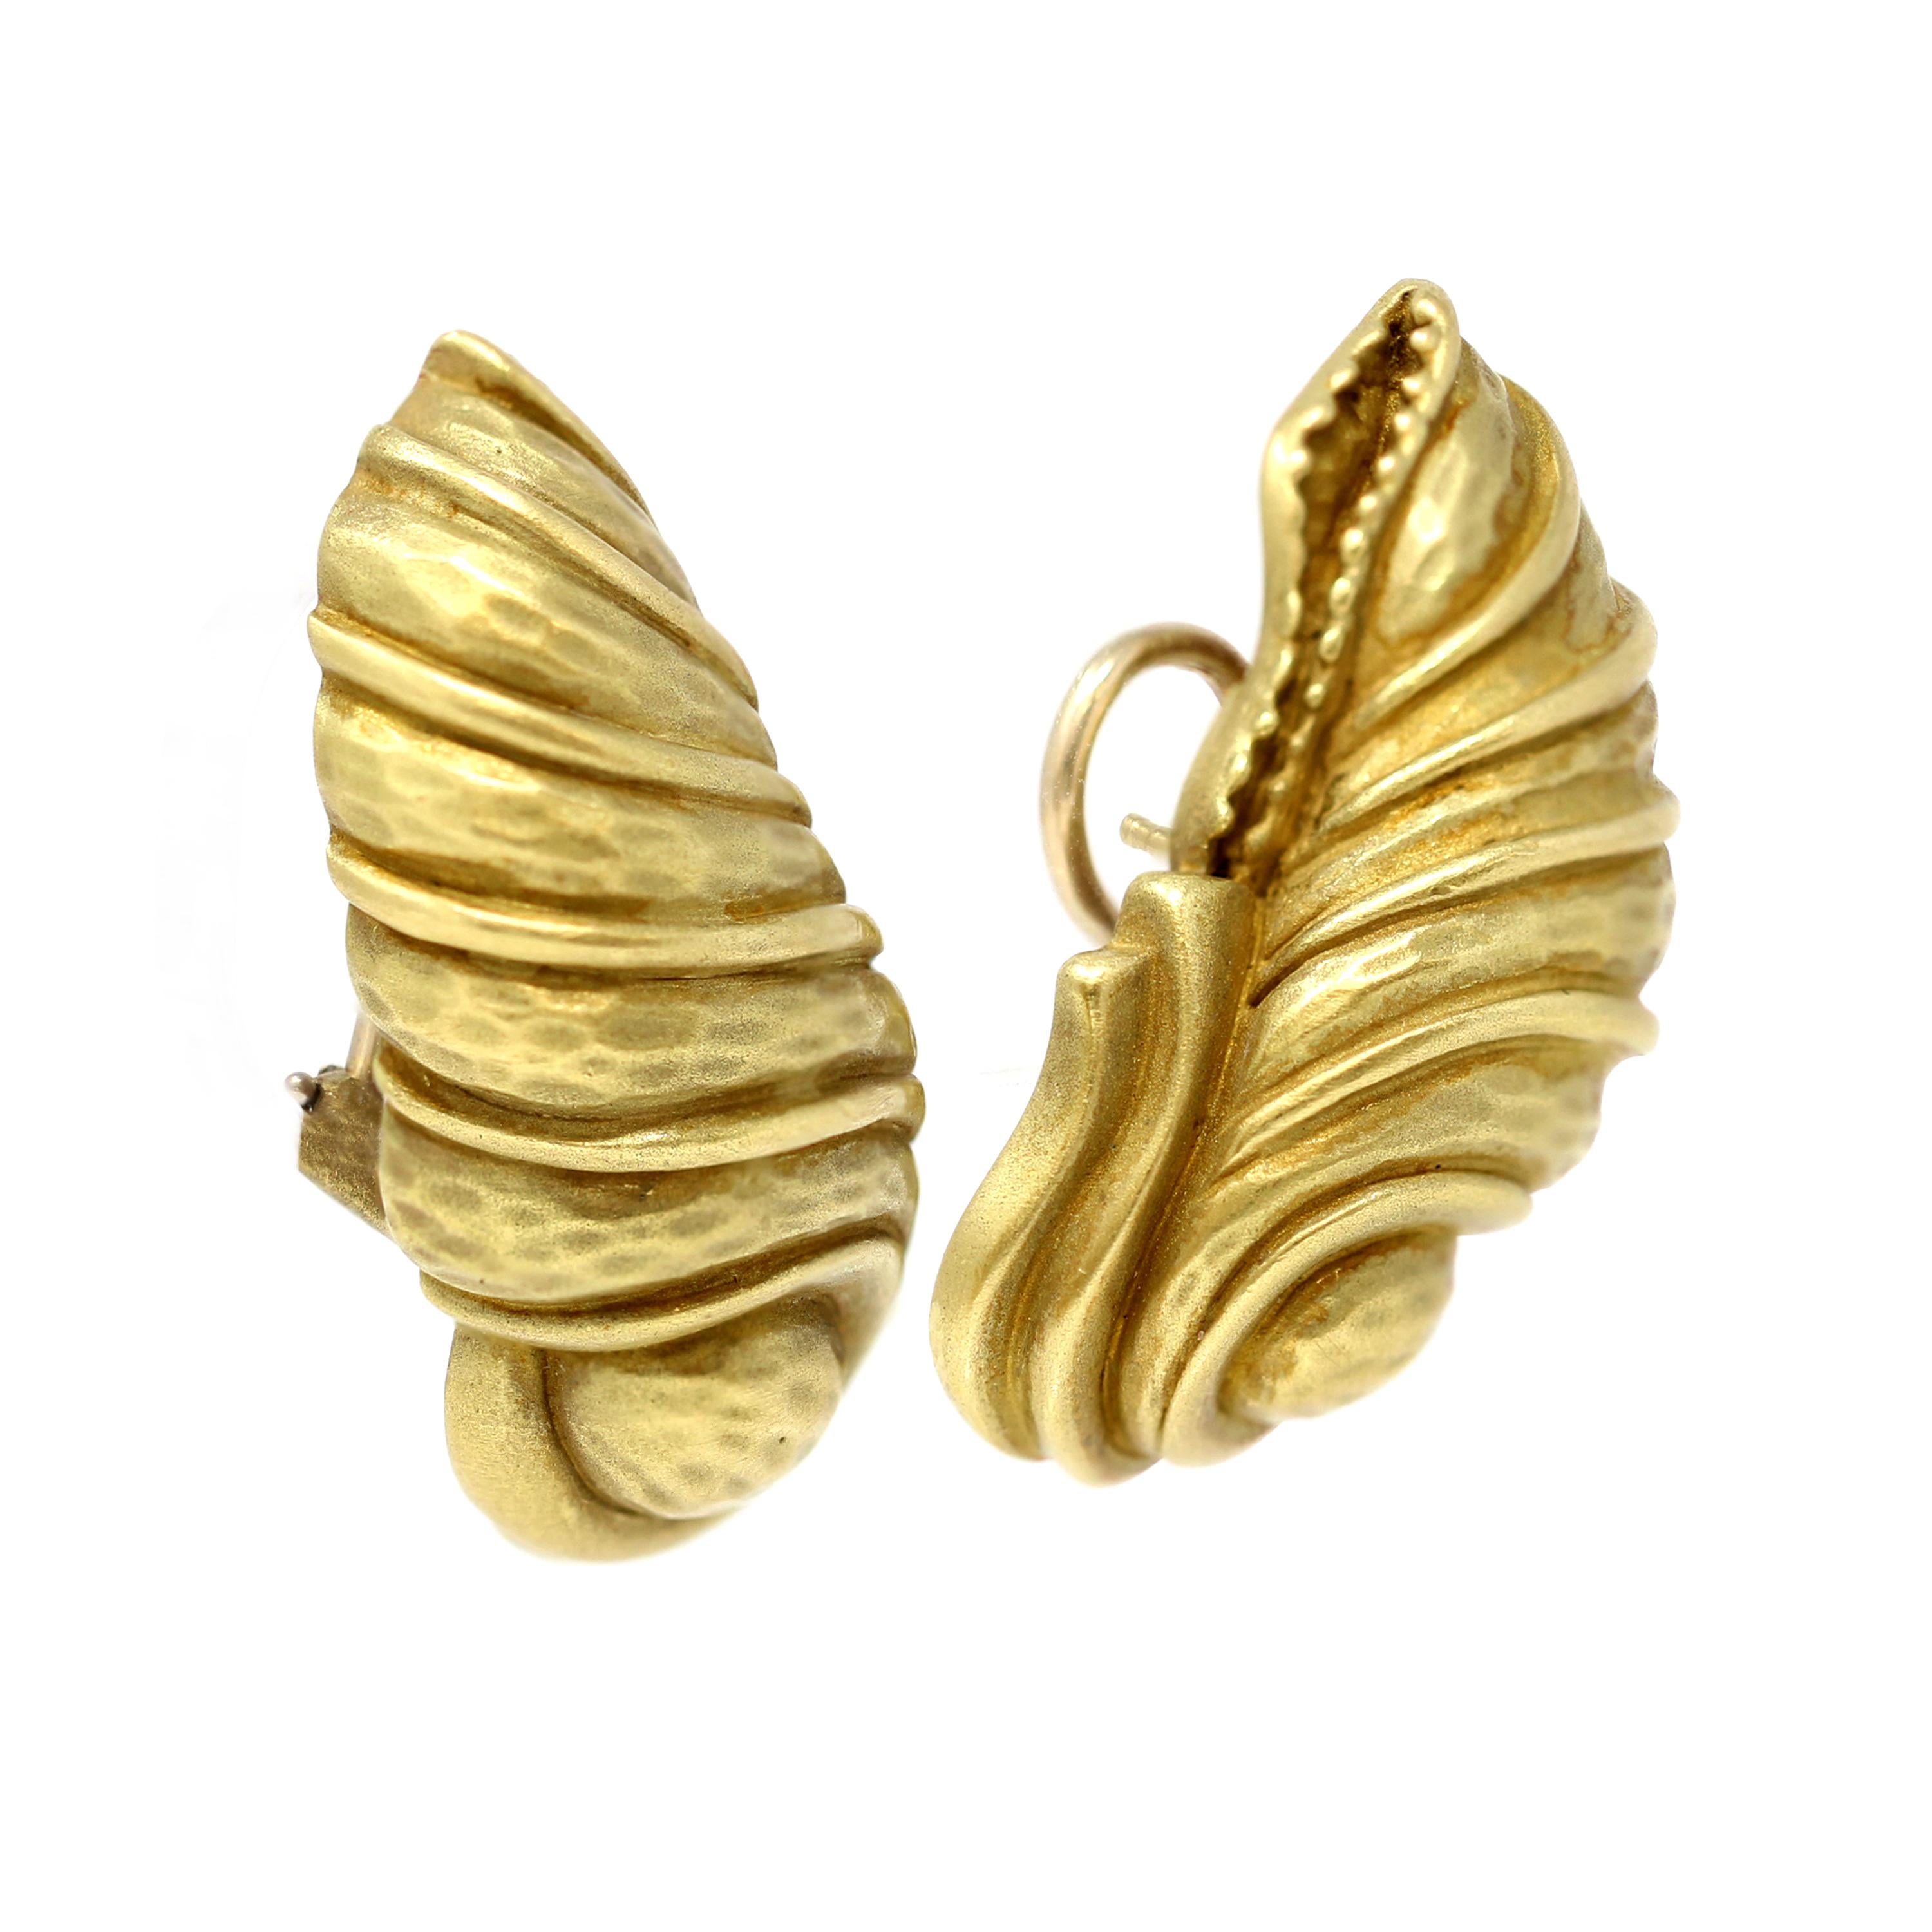 These striking Chrysalis design earclips by Kieselstein Cord are set in 18k greenish yellow gold so specific to the iconic and coveted jewelry designer Kieselstein Cord. These earclips were created in the 1980 in The shape of a Chrysalis wrapping